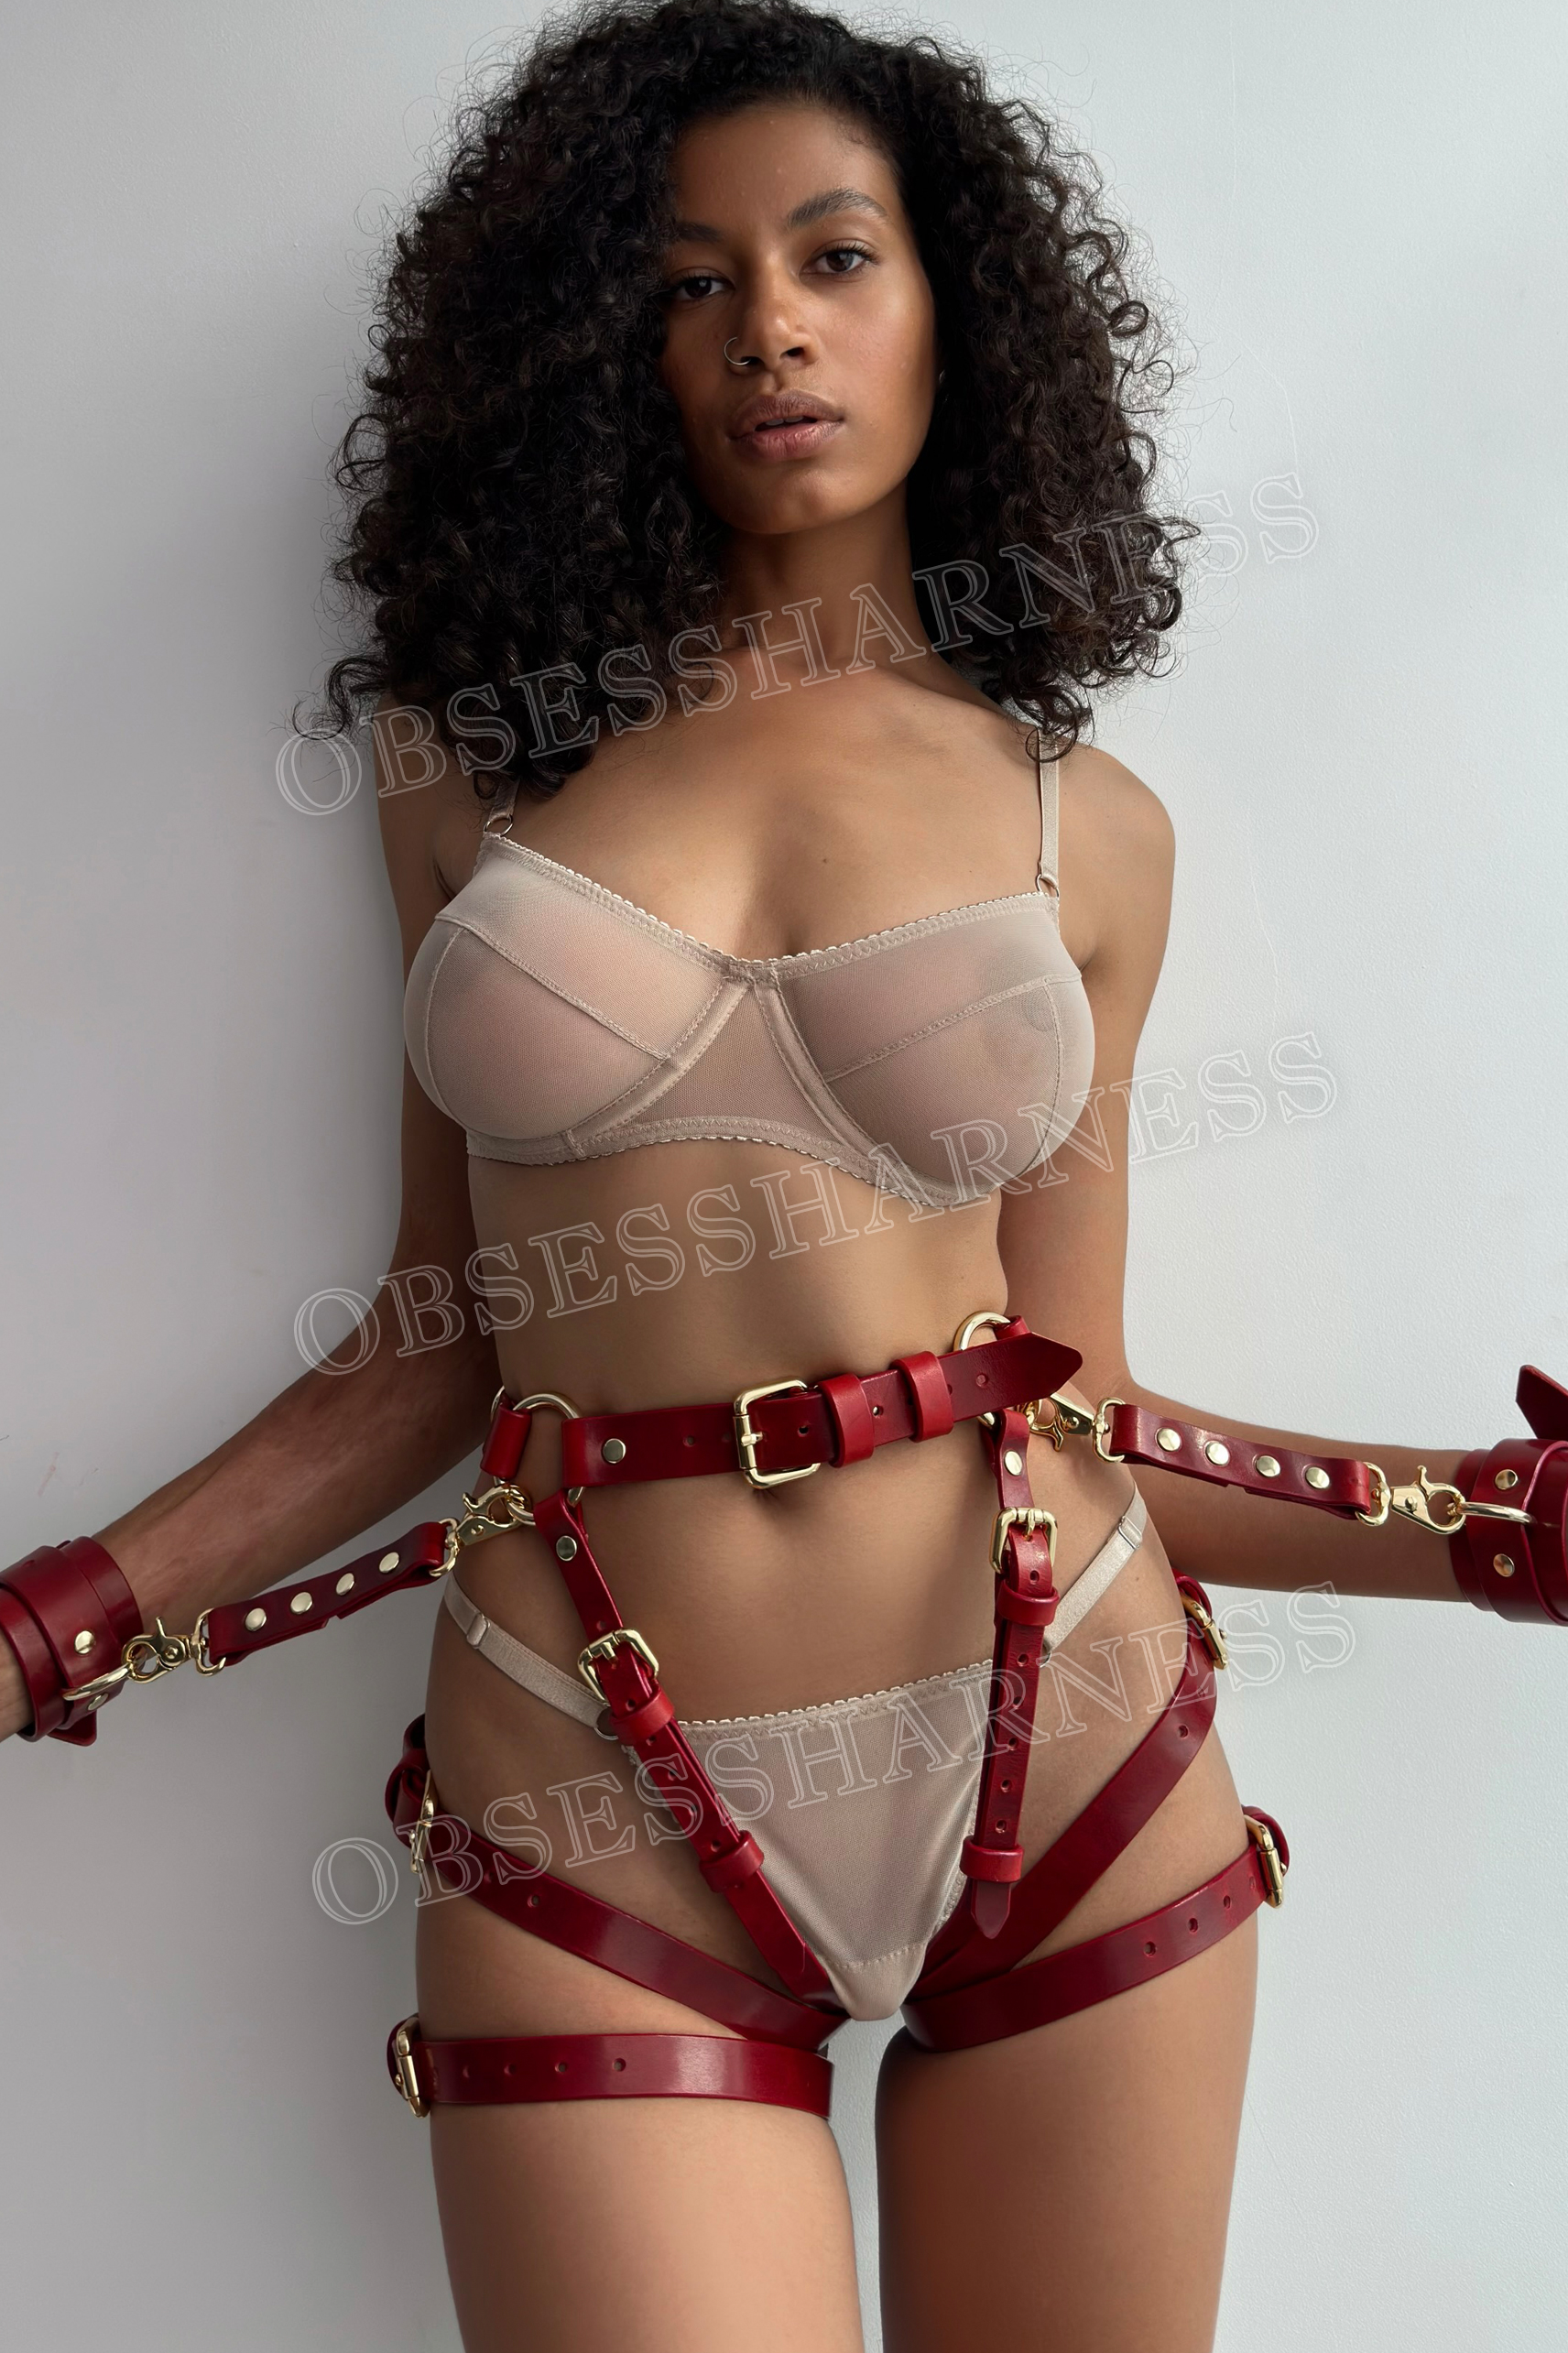 Thigh leather double straps garter woman uotfit with cuffs double-sided fixations to waist balt